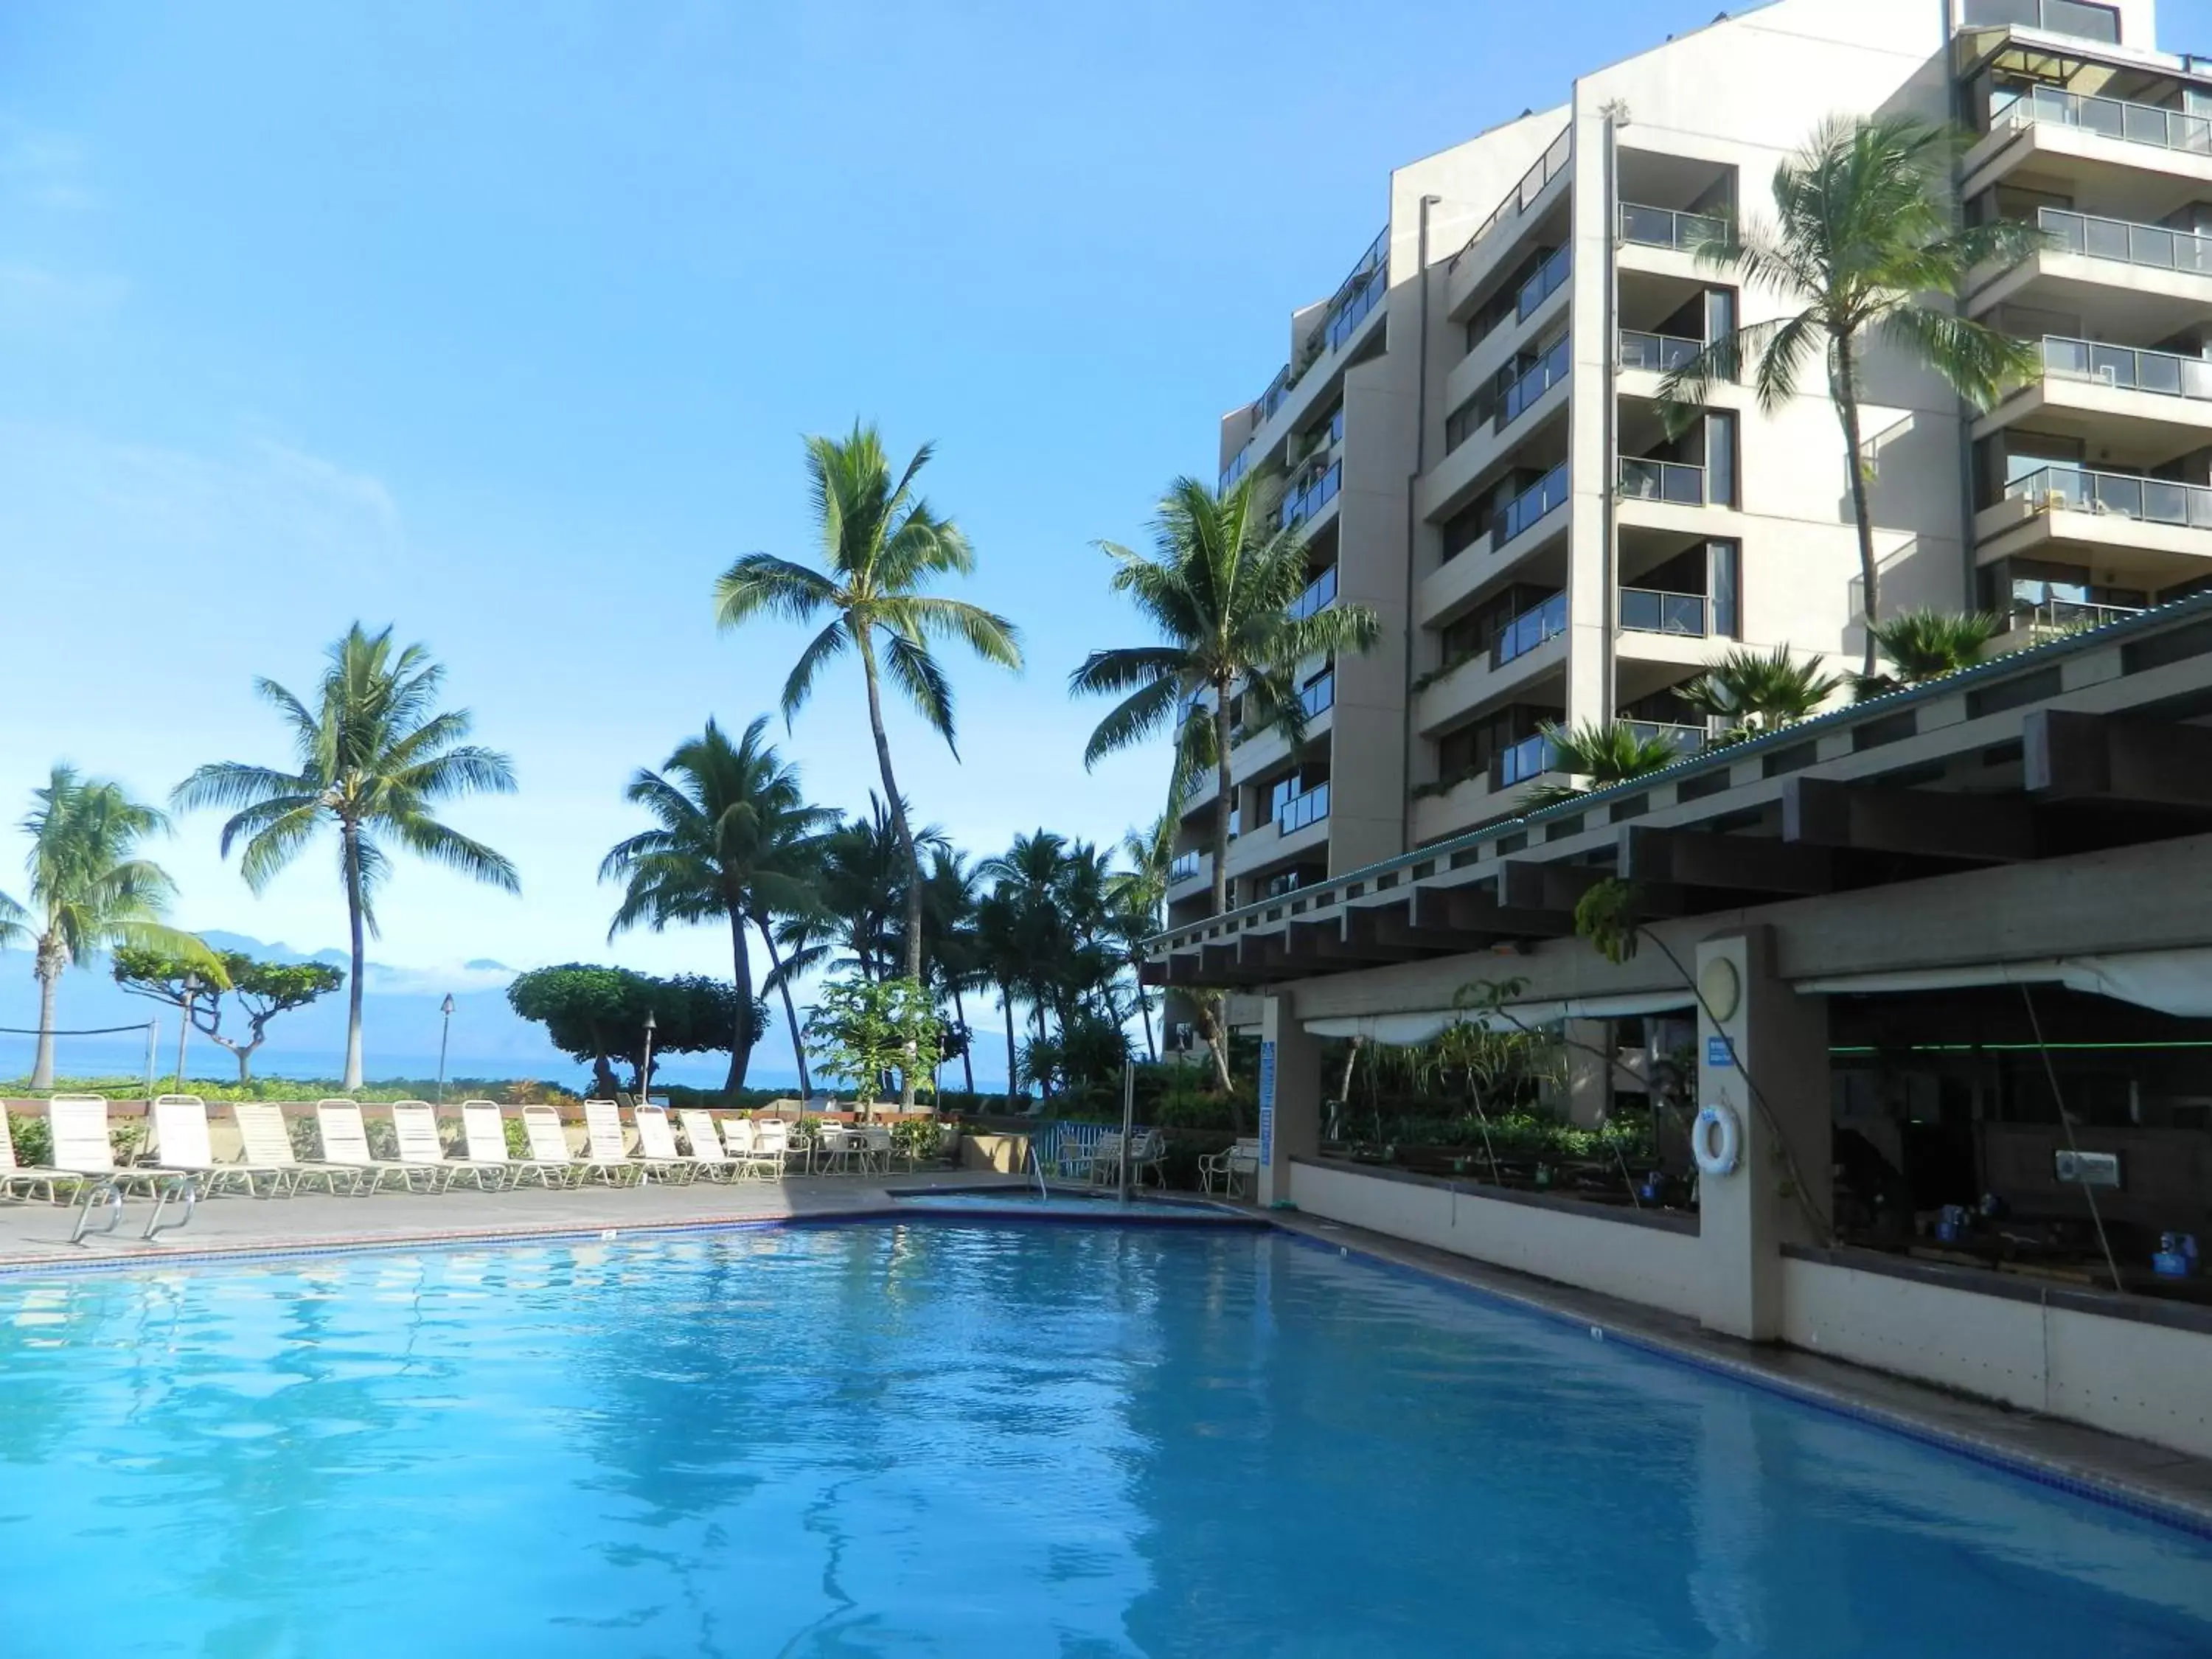 Property building, Swimming Pool in Sands of Kahana Vacation Club